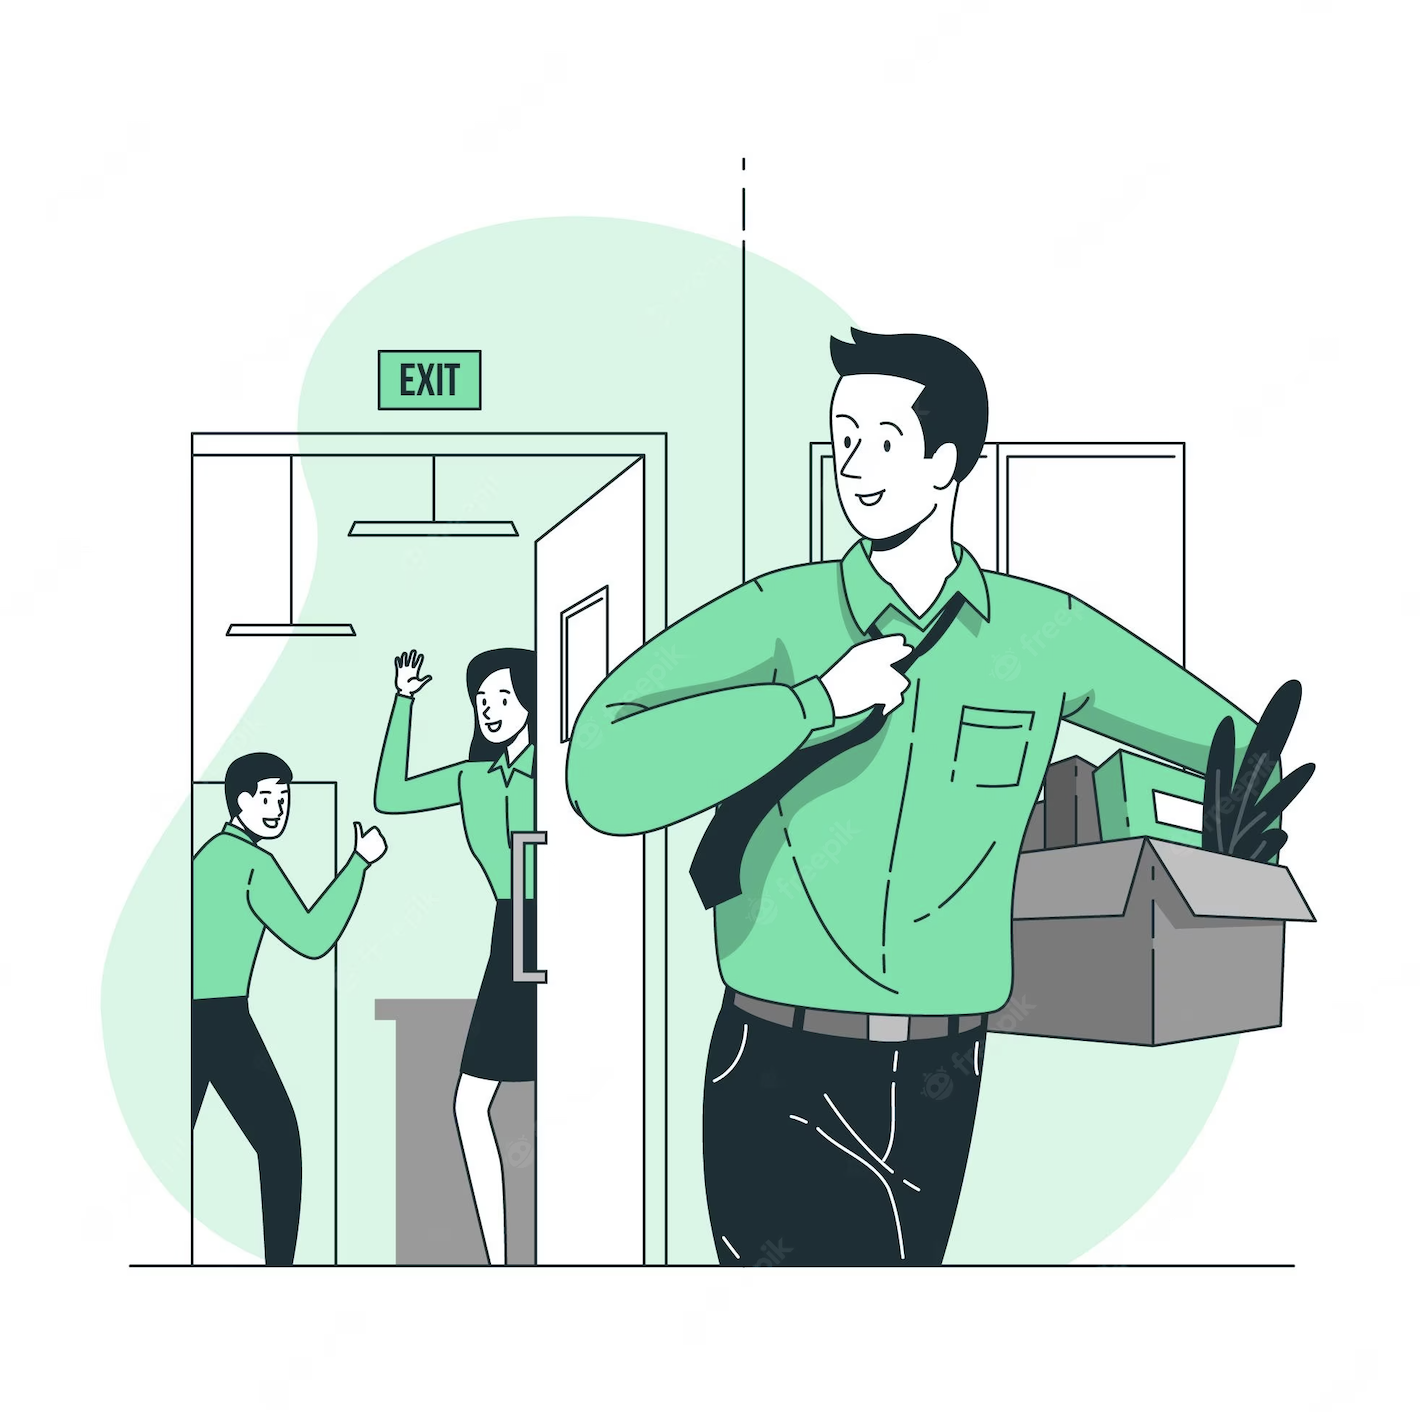 4 Ways a Corporate Community Platform Helps With Employee Exit Management